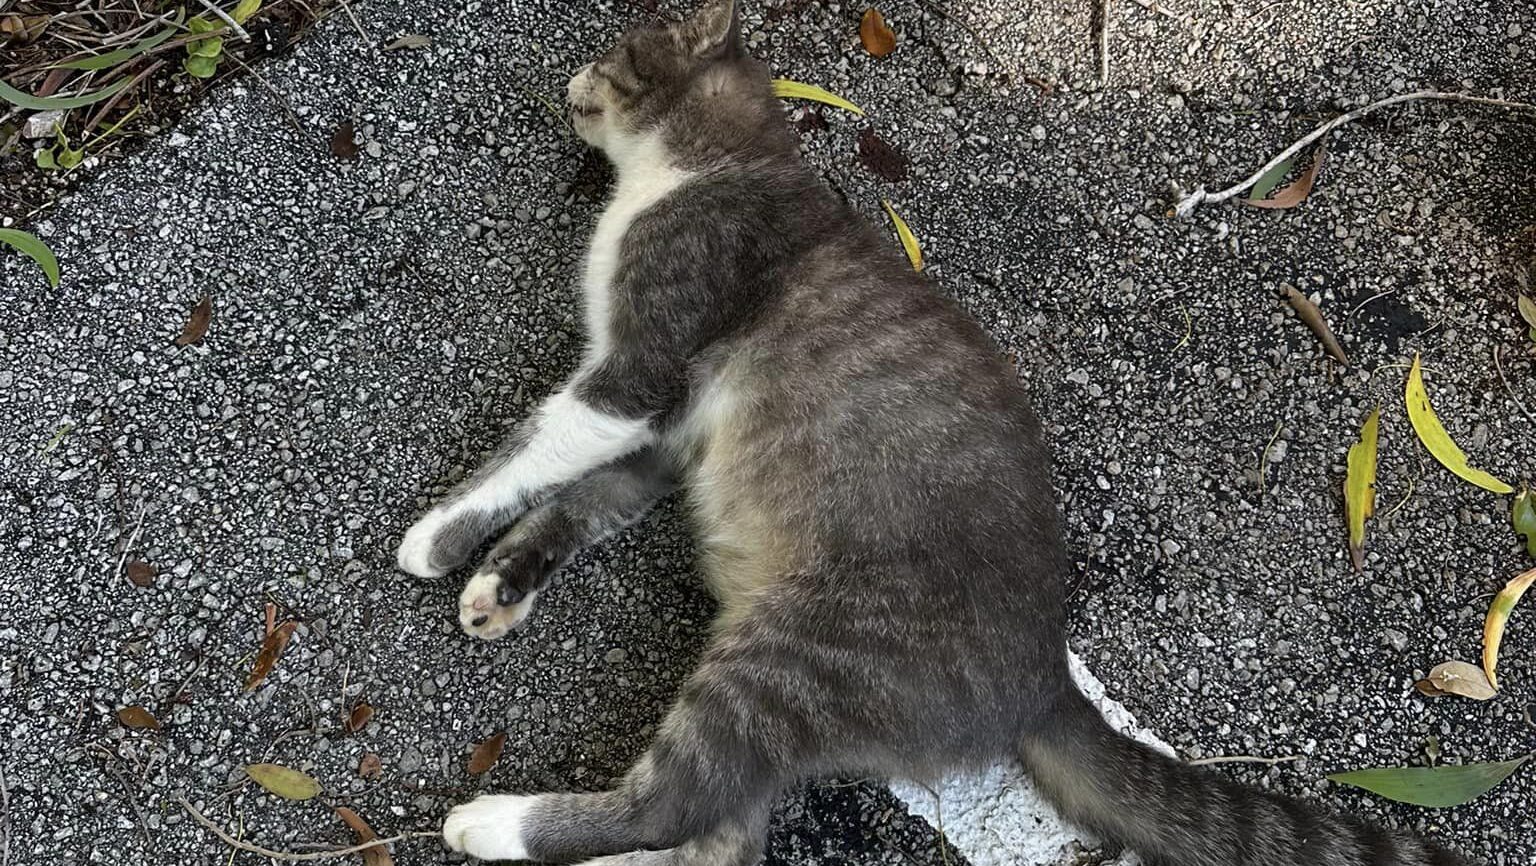 "These are Innocent Animals": Seven Cats Shot, Three Killed in Tamarac